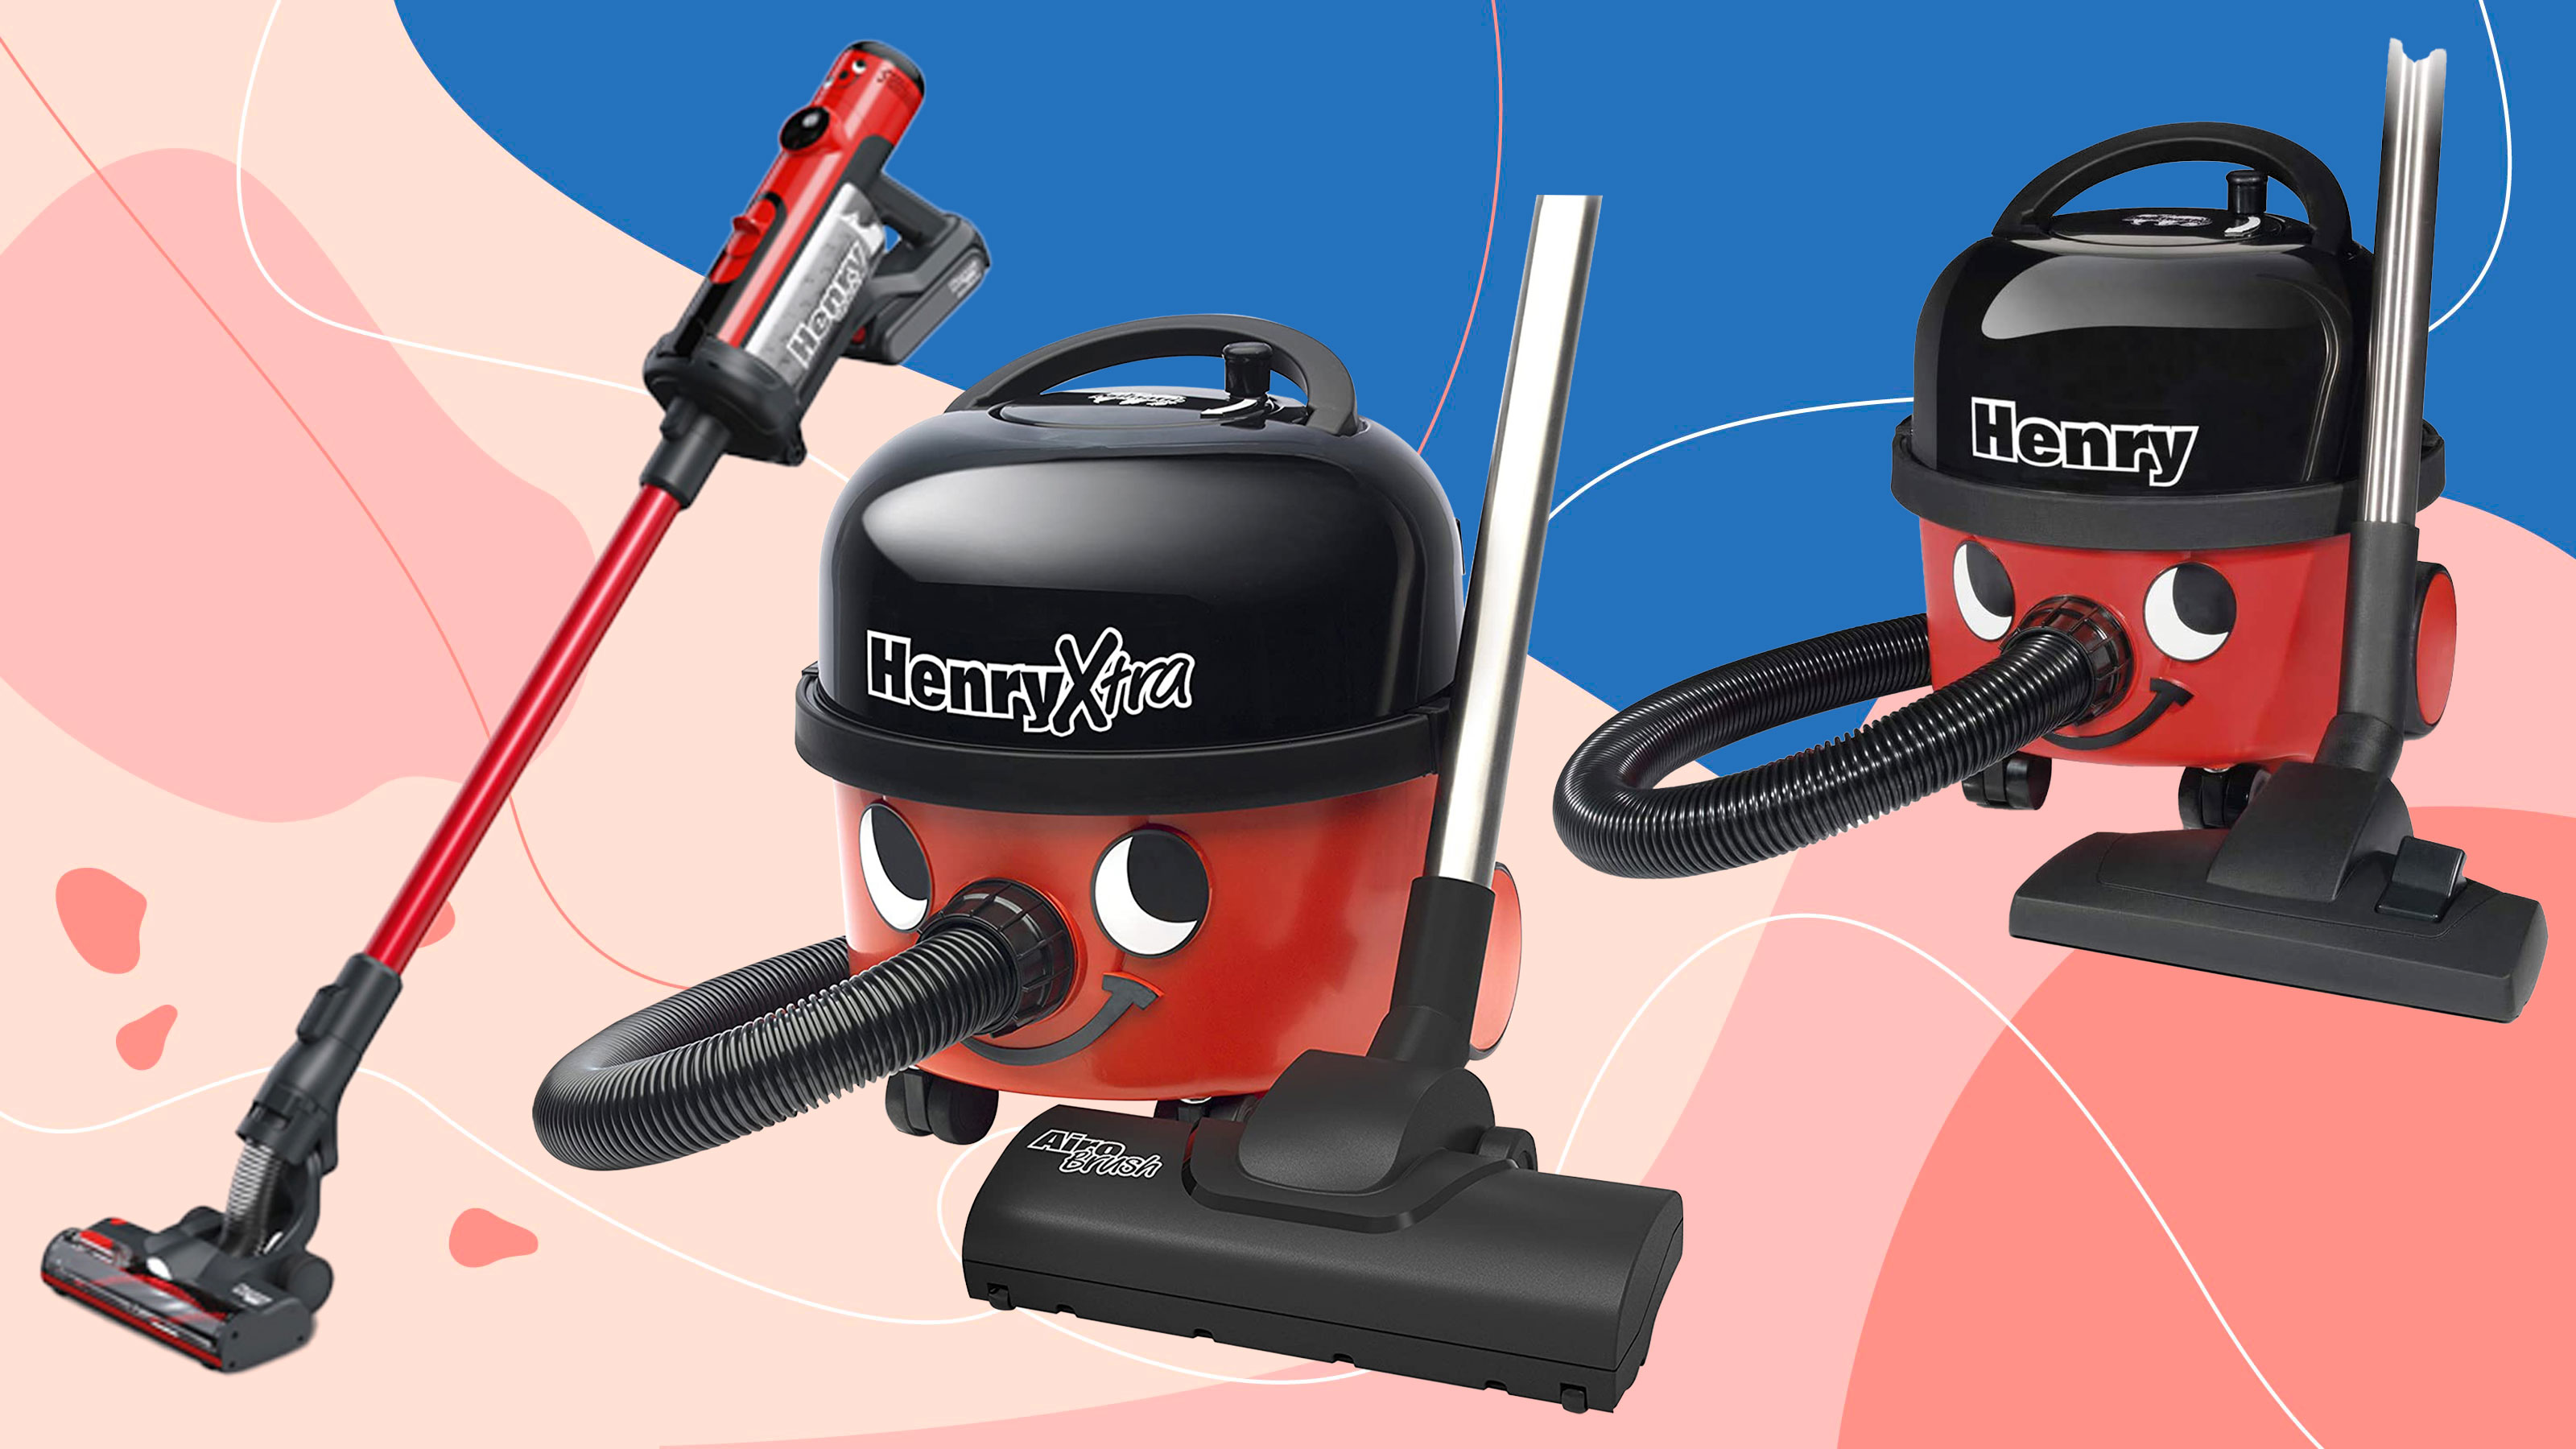 Best Henry Hoover Vacuum Cleaner Comparison & Reviews 2021